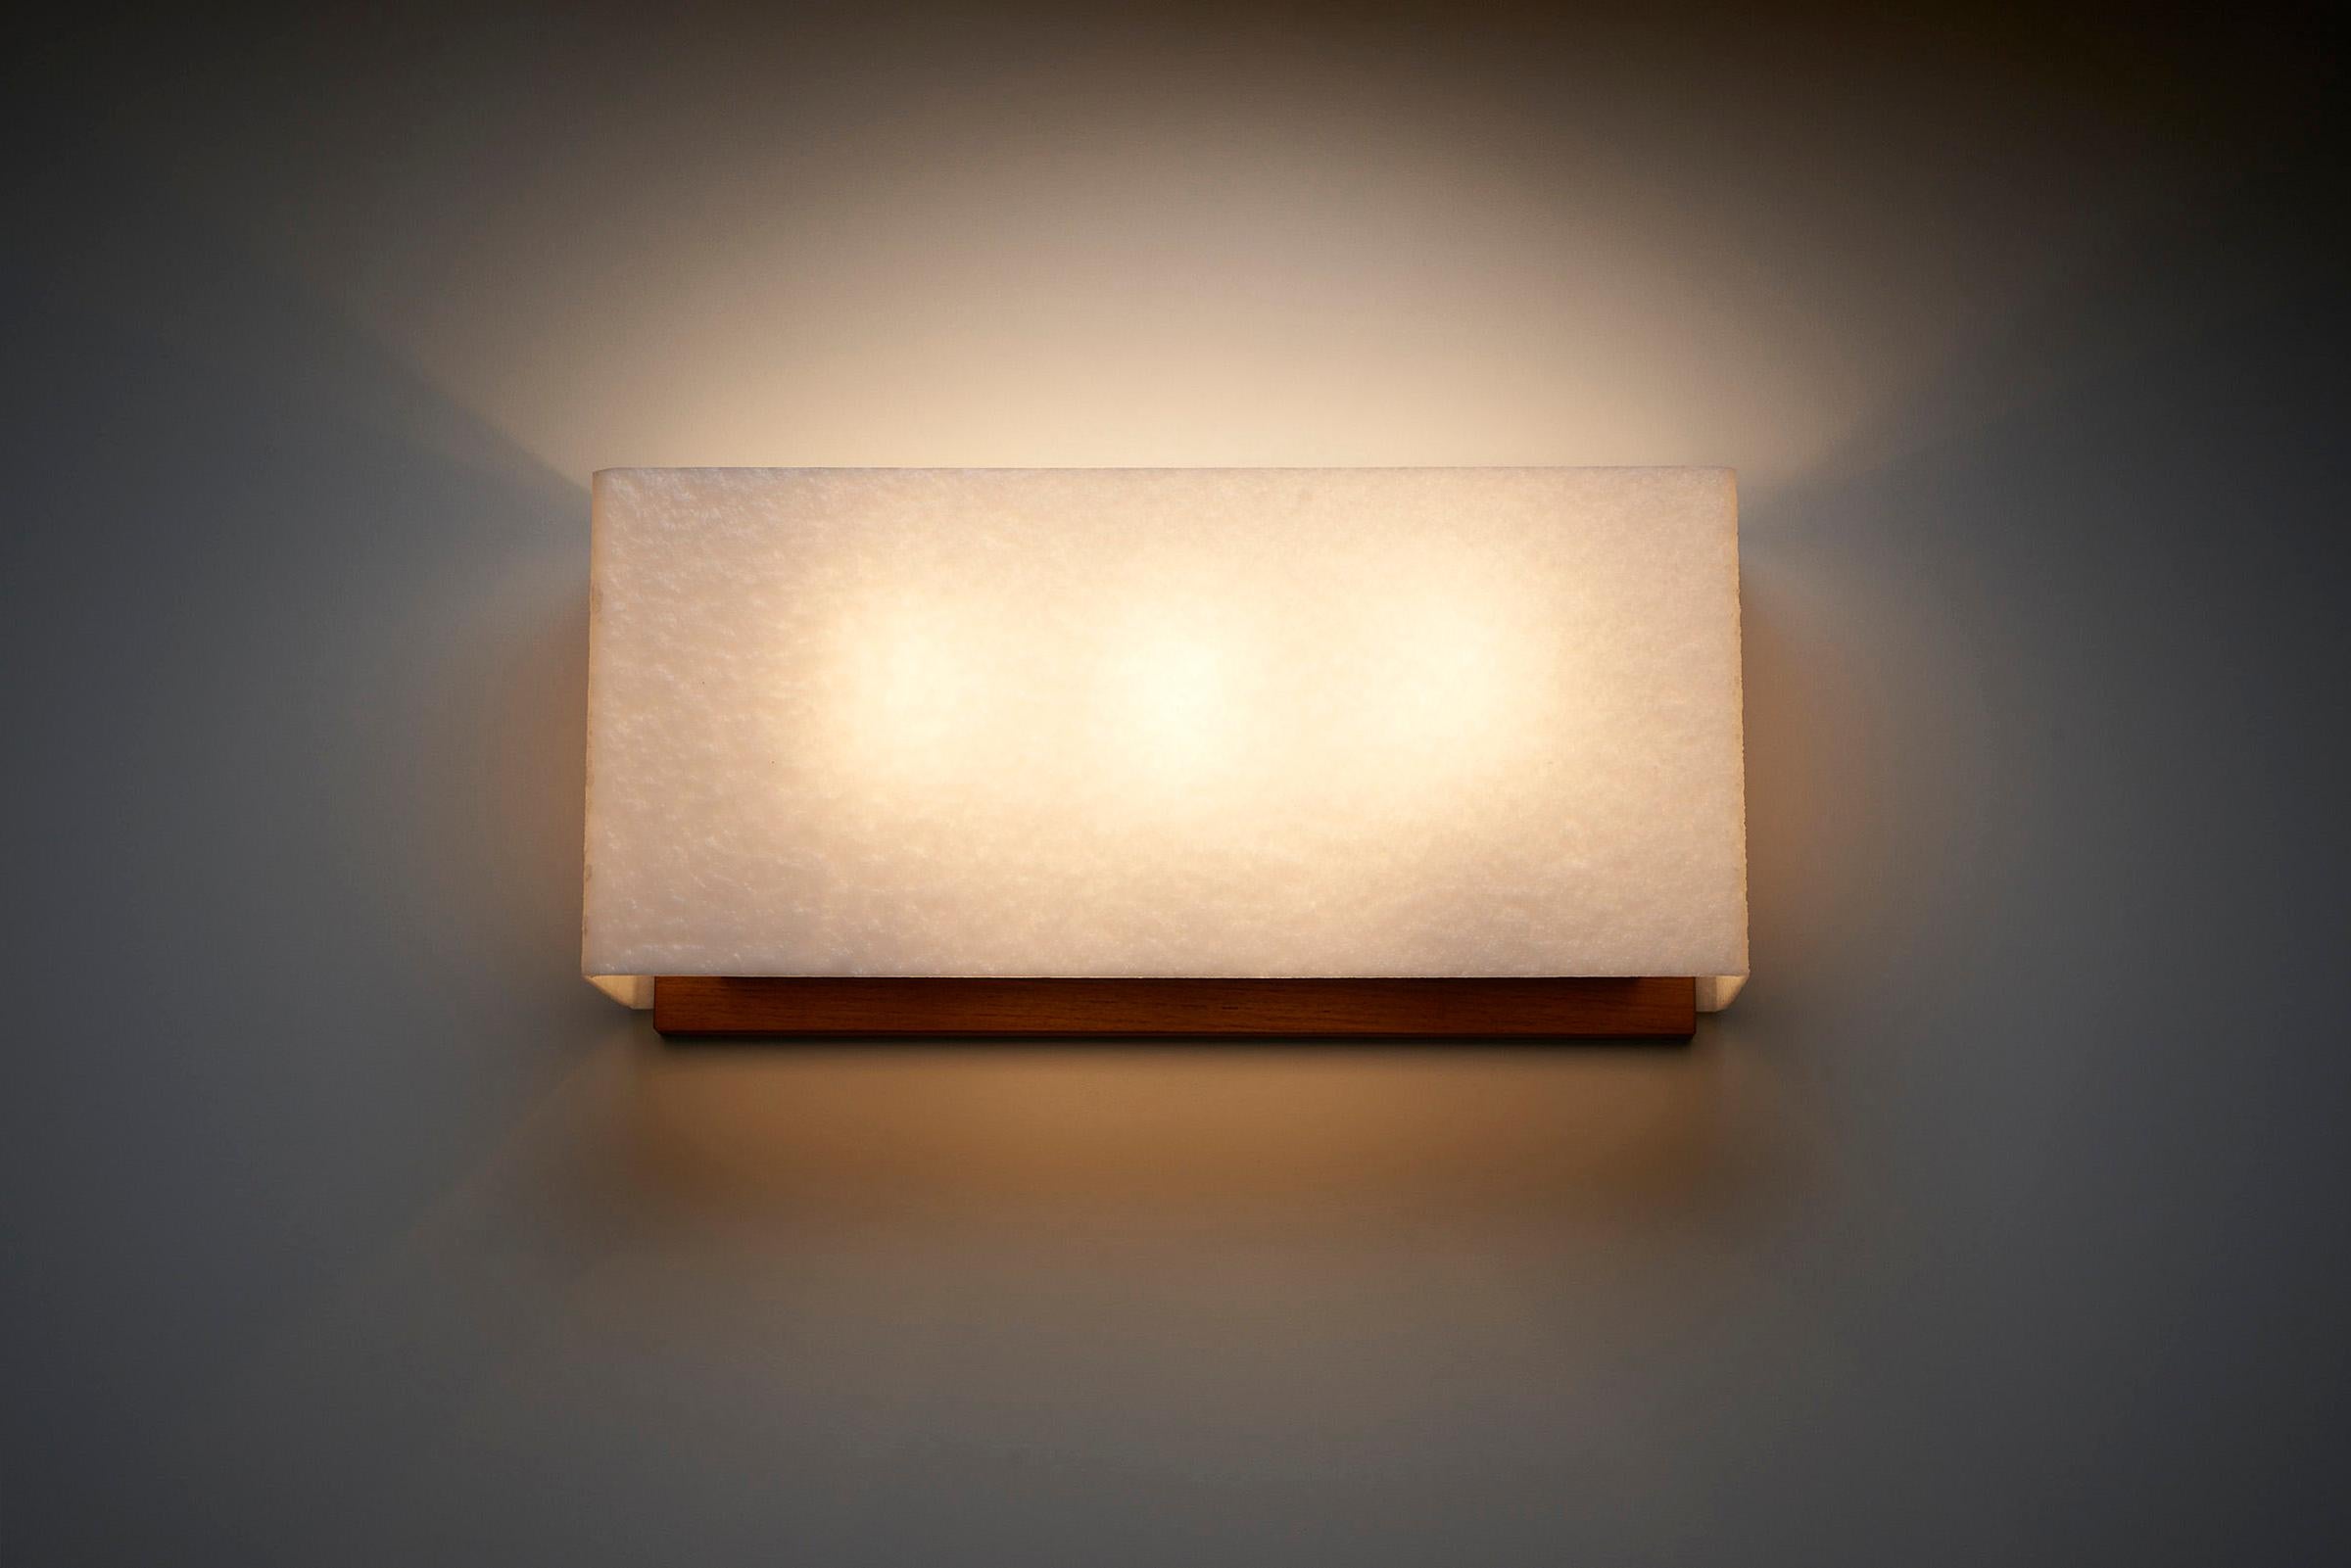 Introducing the Large Wall Lamp with Textured Diffuser and Teak Frame, a remarkable piece crafted by Kontakt-Werkstätten in Germany. This wall lamp stands out with its generous width, measuring 45cm, which adds a captivating focal point to any room